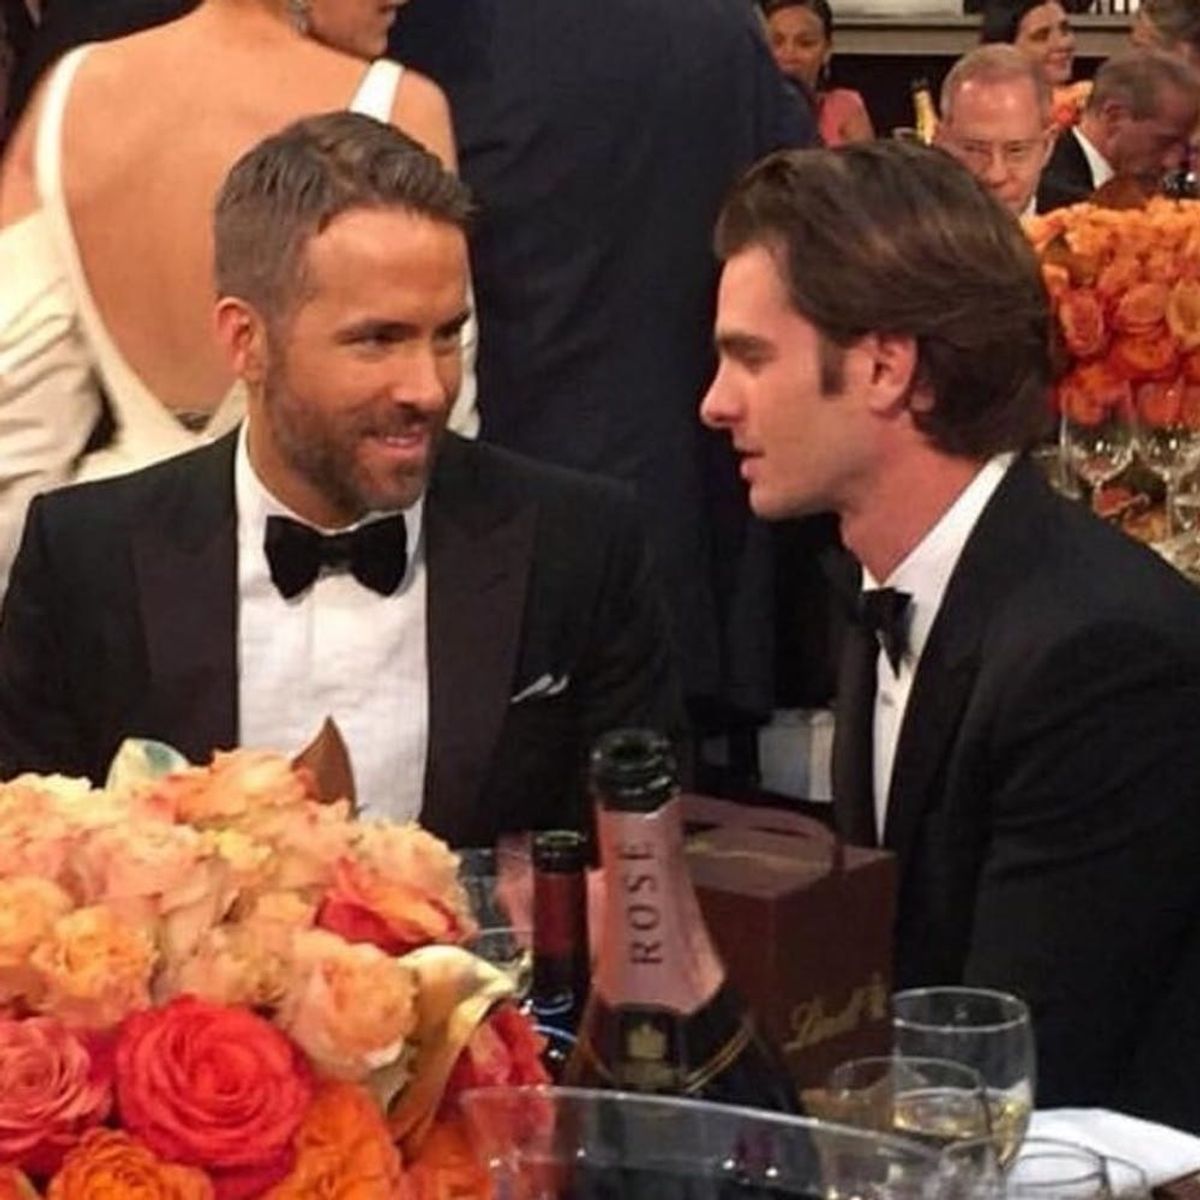 Ryan Reynolds and Andrew Garfield Kissed at the Golden Globes and You Probably Missed It